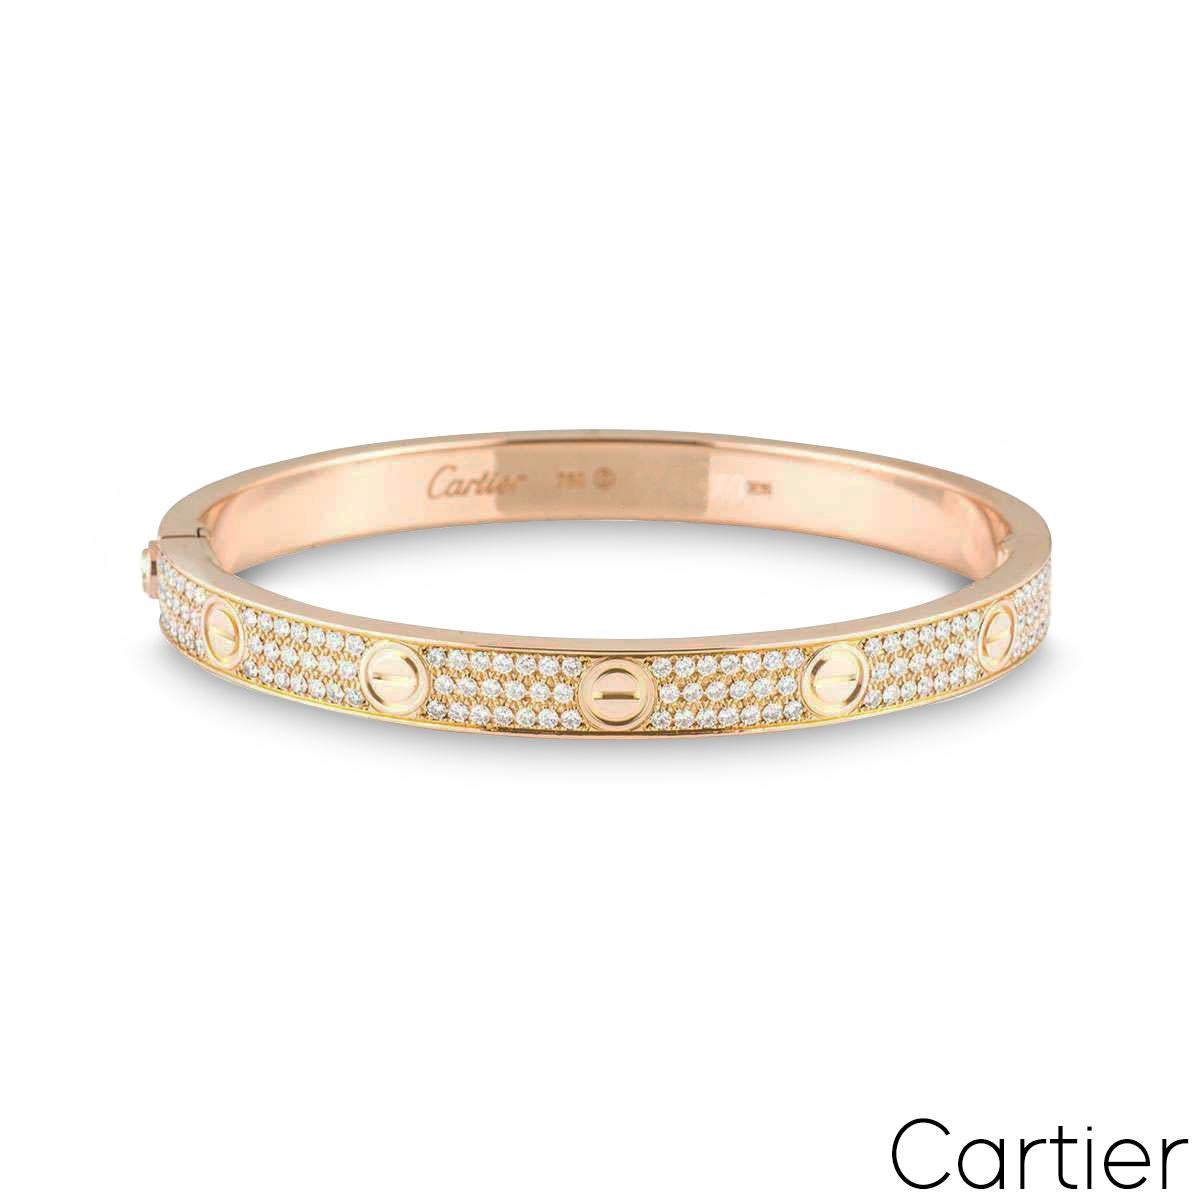 A stunning 18k rose gold diamond Cartier bracelet from the Love collection. The bracelet comprises of the iconic screw motif on the outer edge complemented with 204 round brilliant cut diamonds throughout, in a pave setting. The diamonds have a